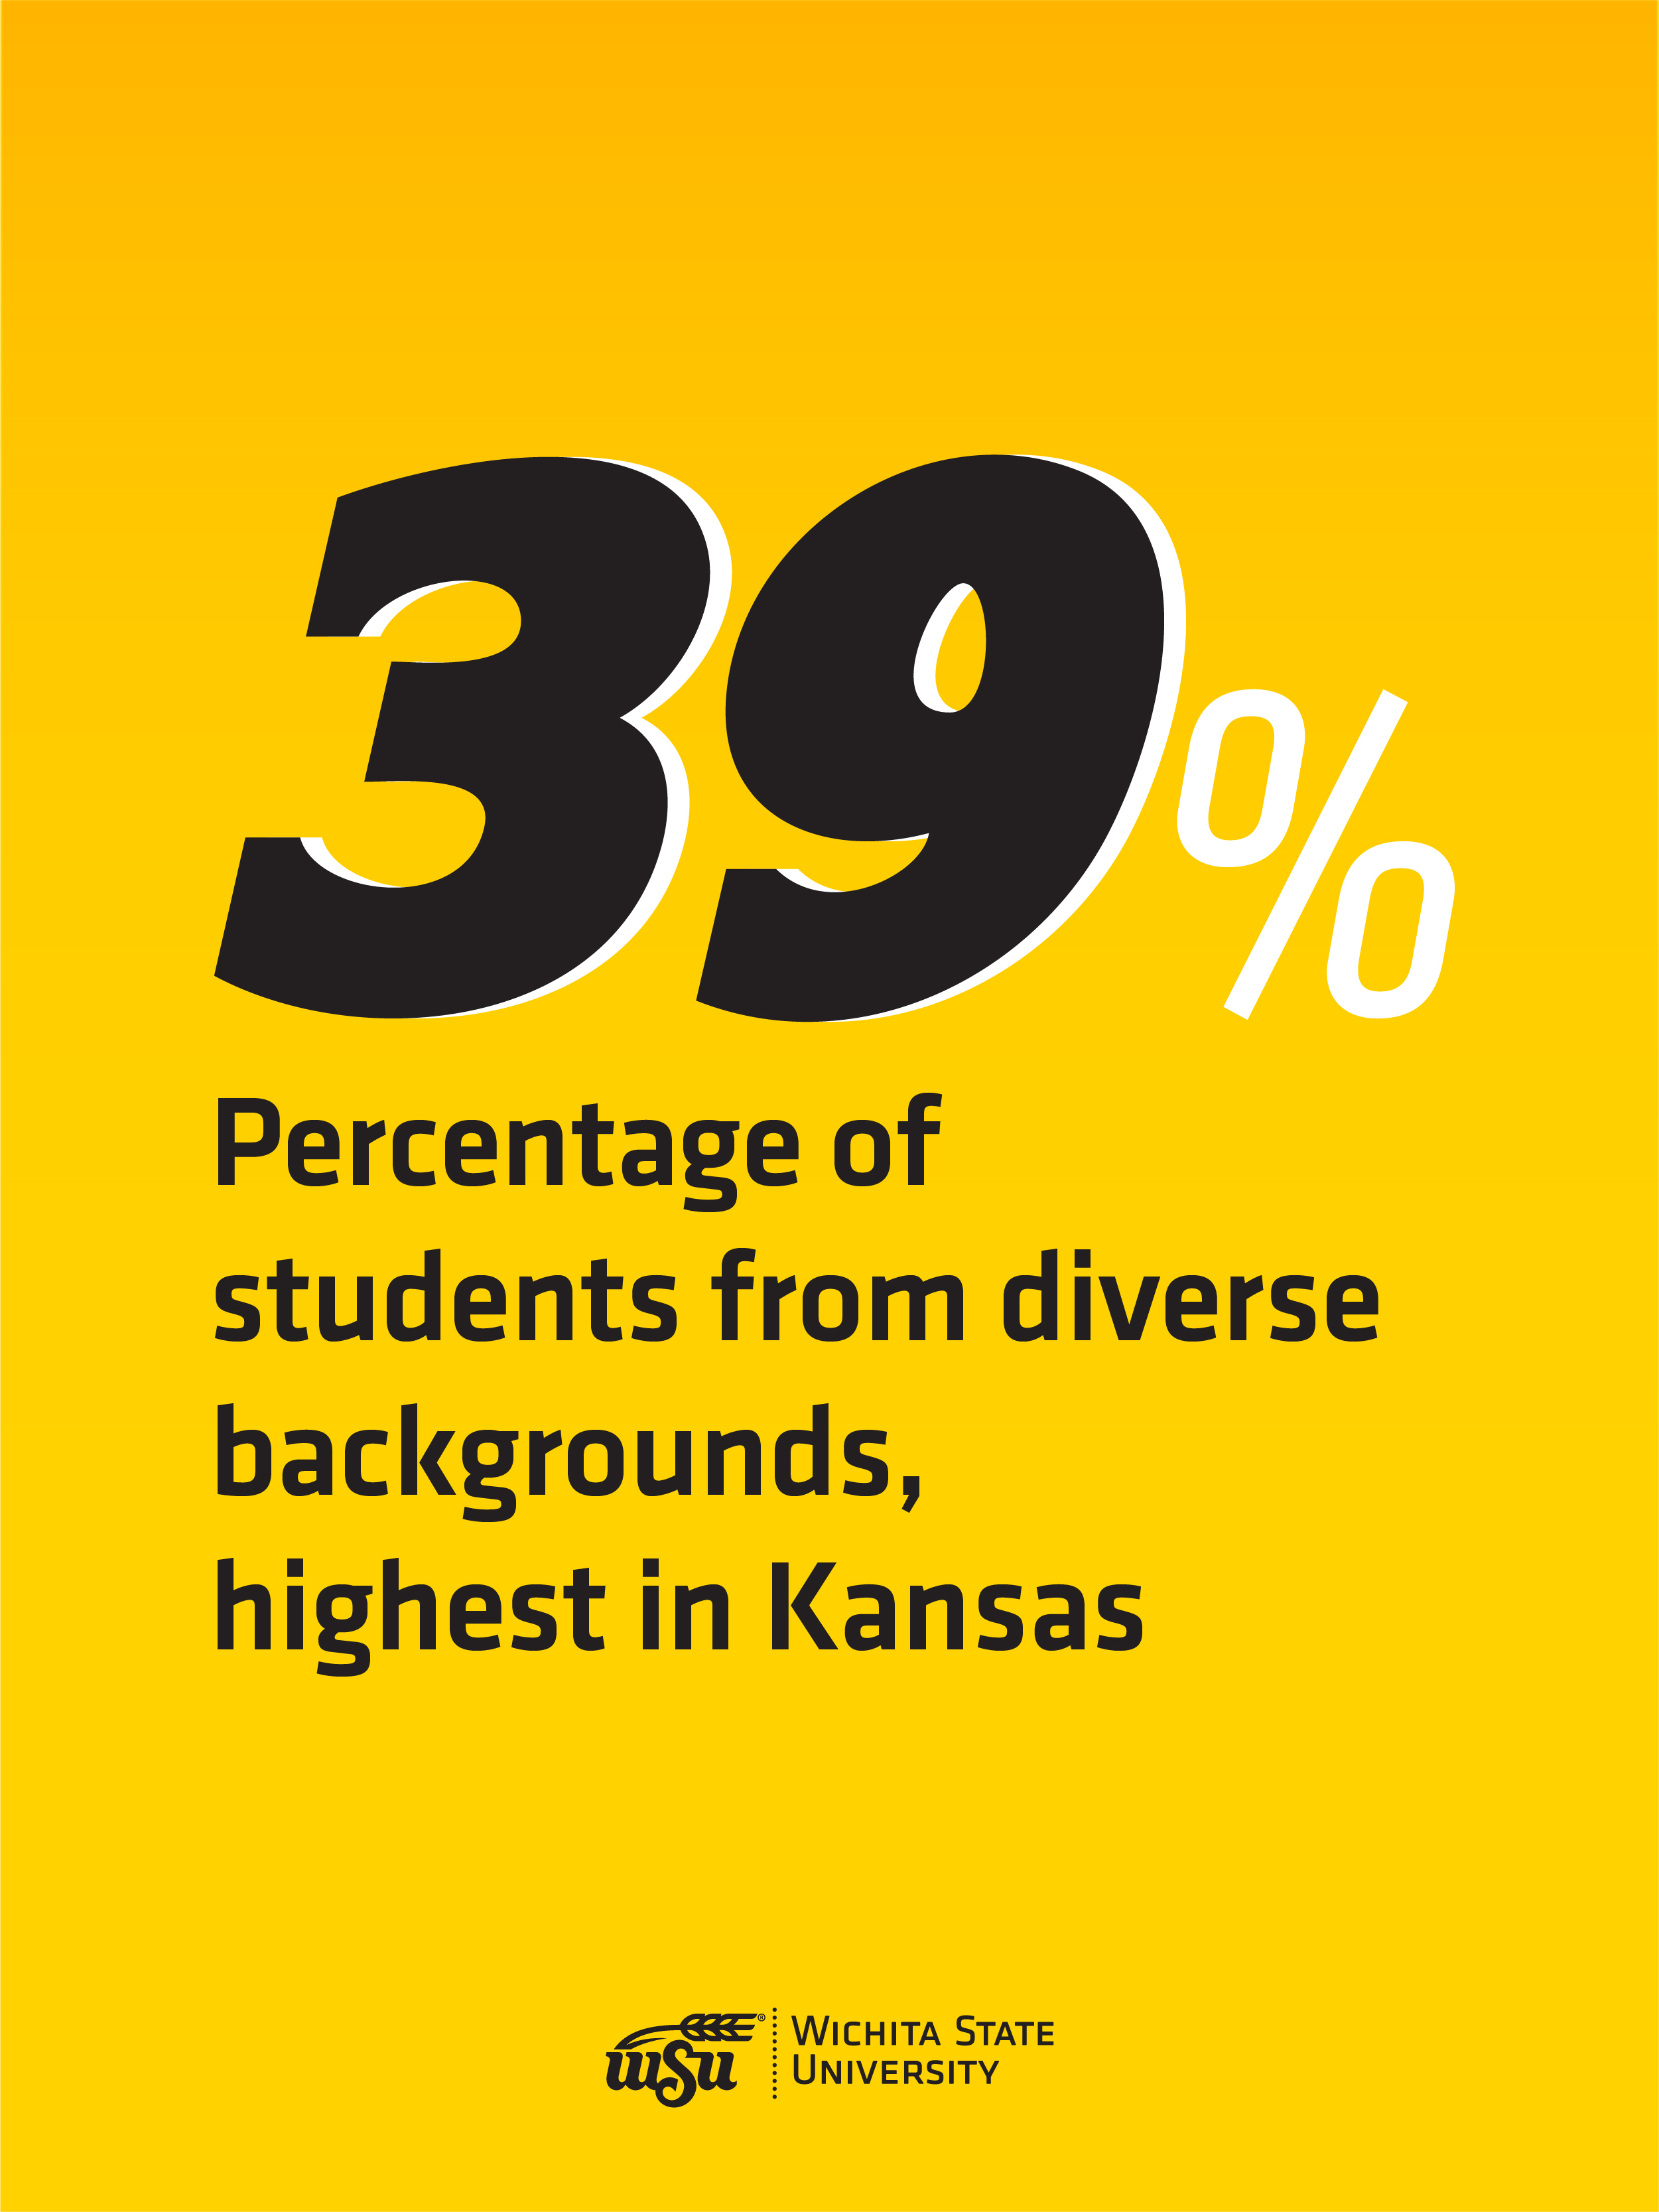 Wichita State is Kansas’ most diverse college campus with more than 39% of our students coming from diverse backgrounds.